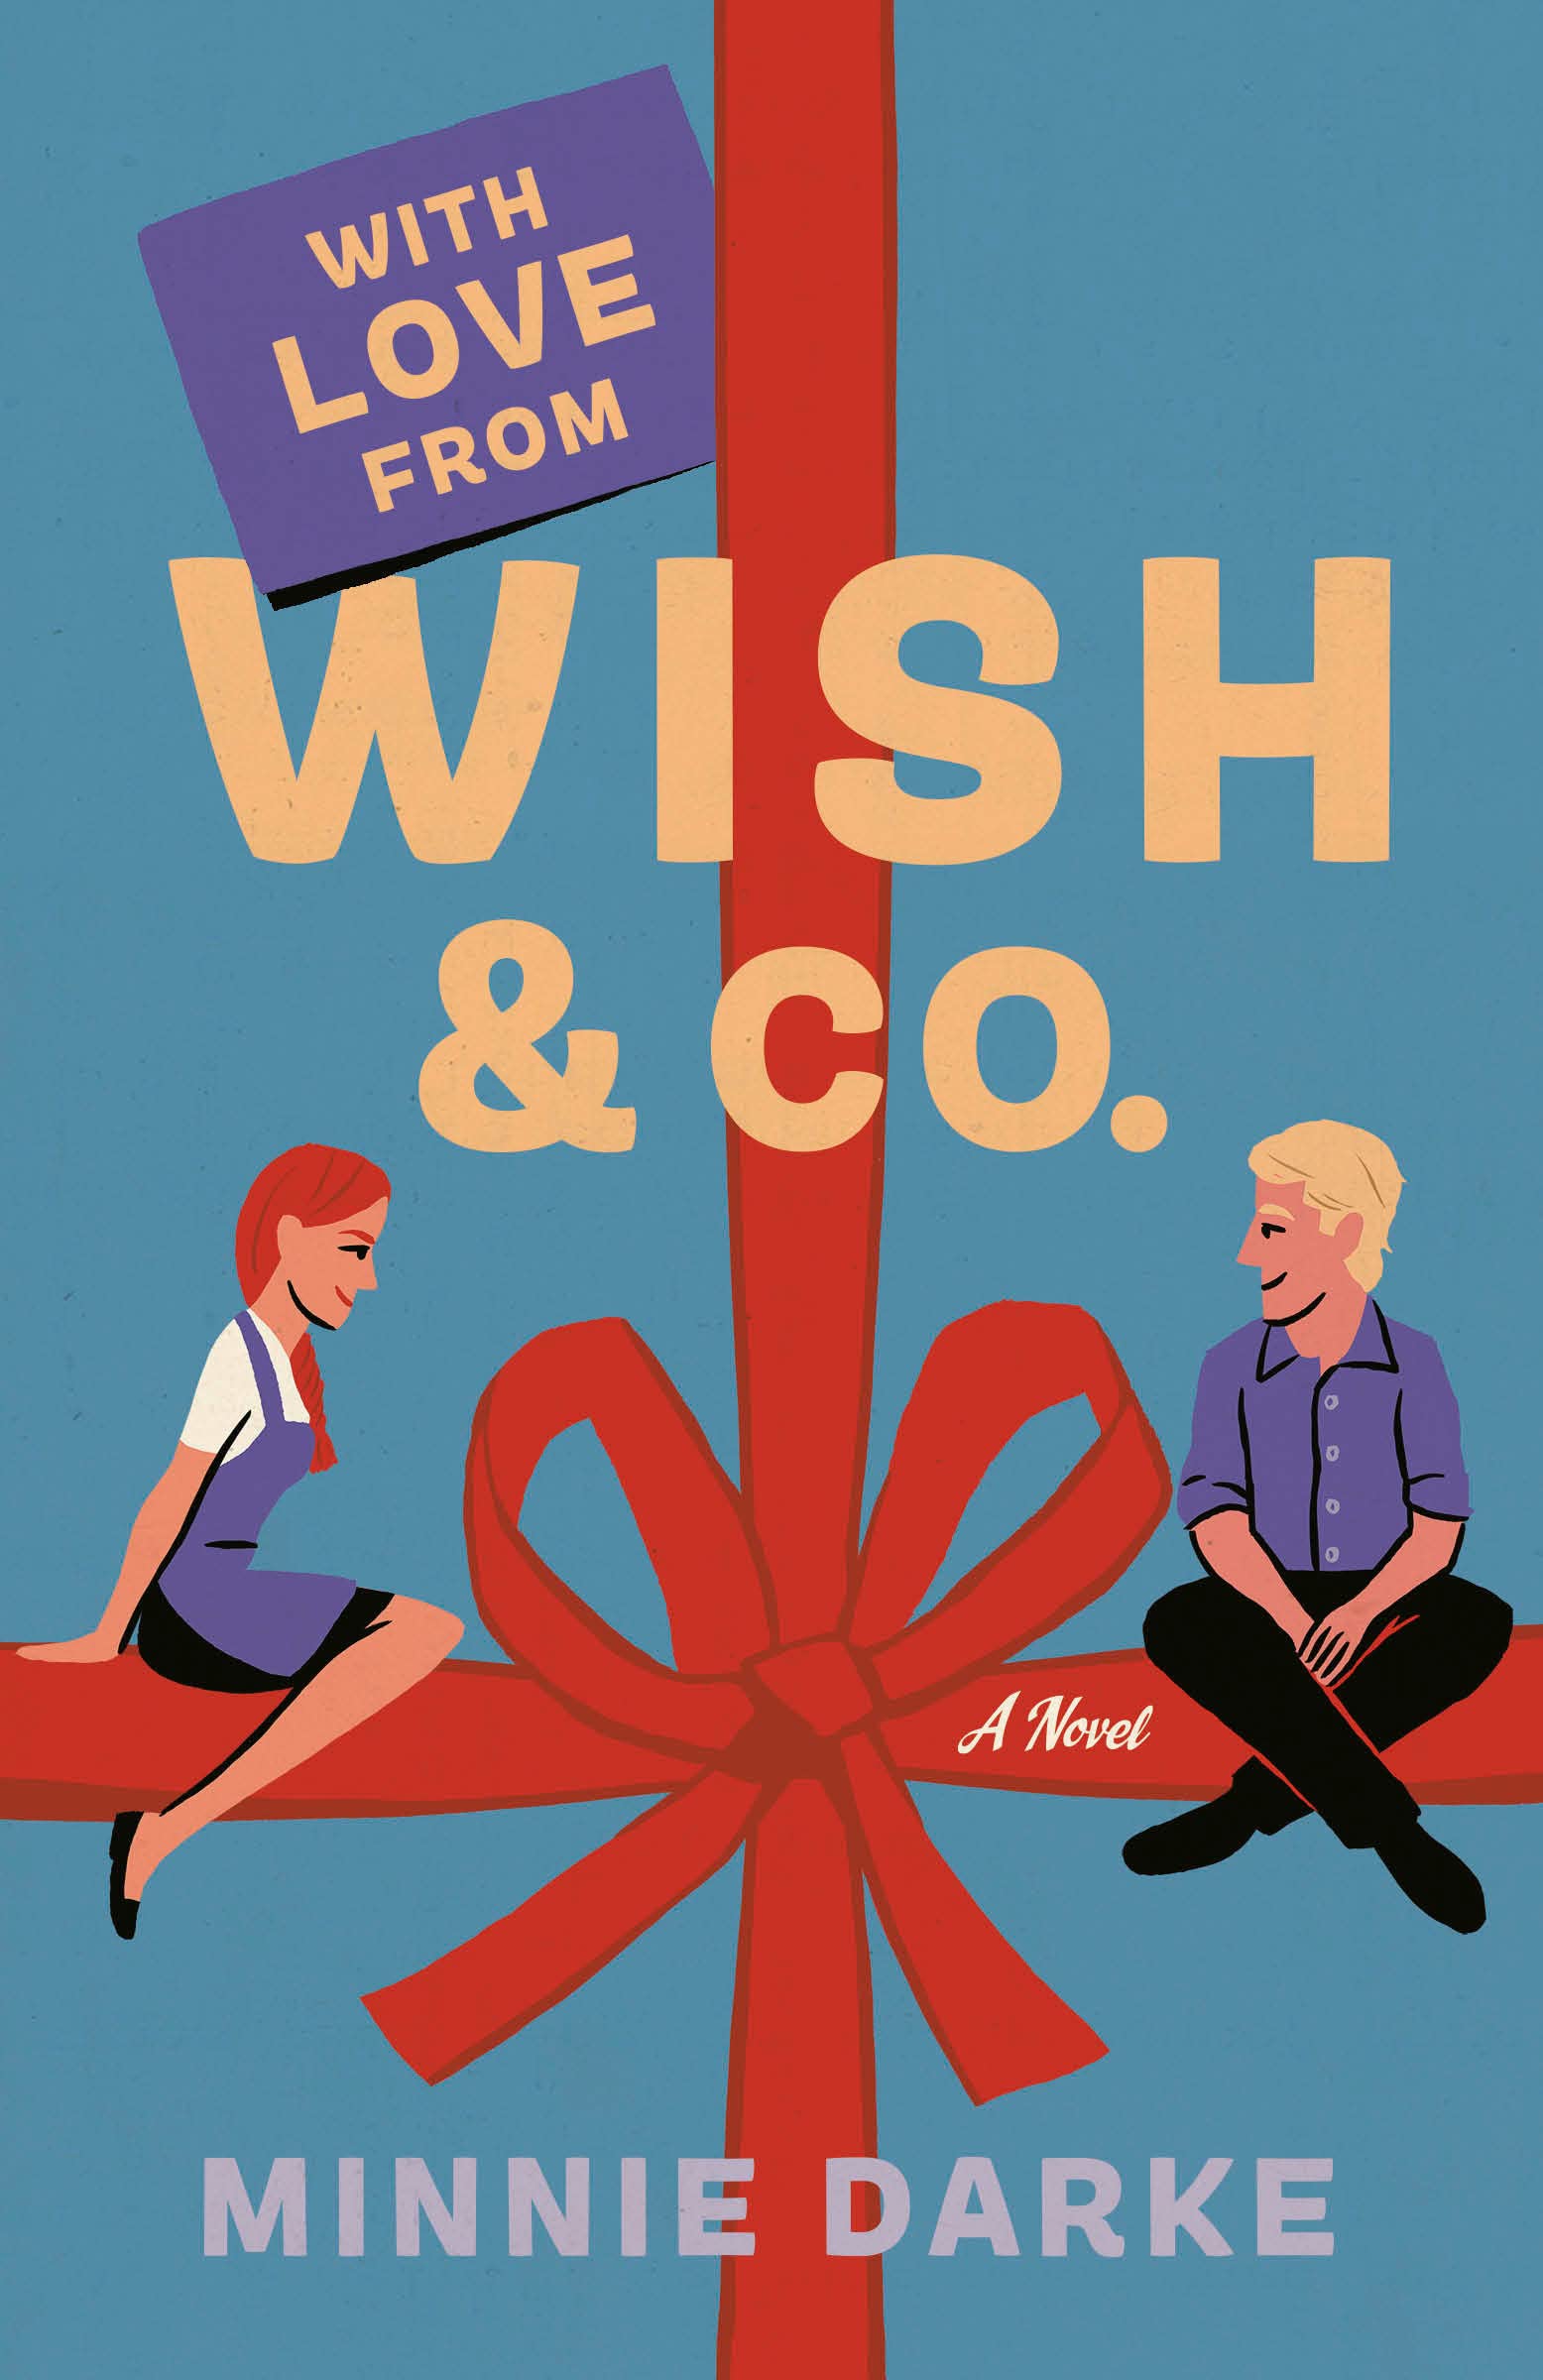 Image for "With Love from Wish and Co."